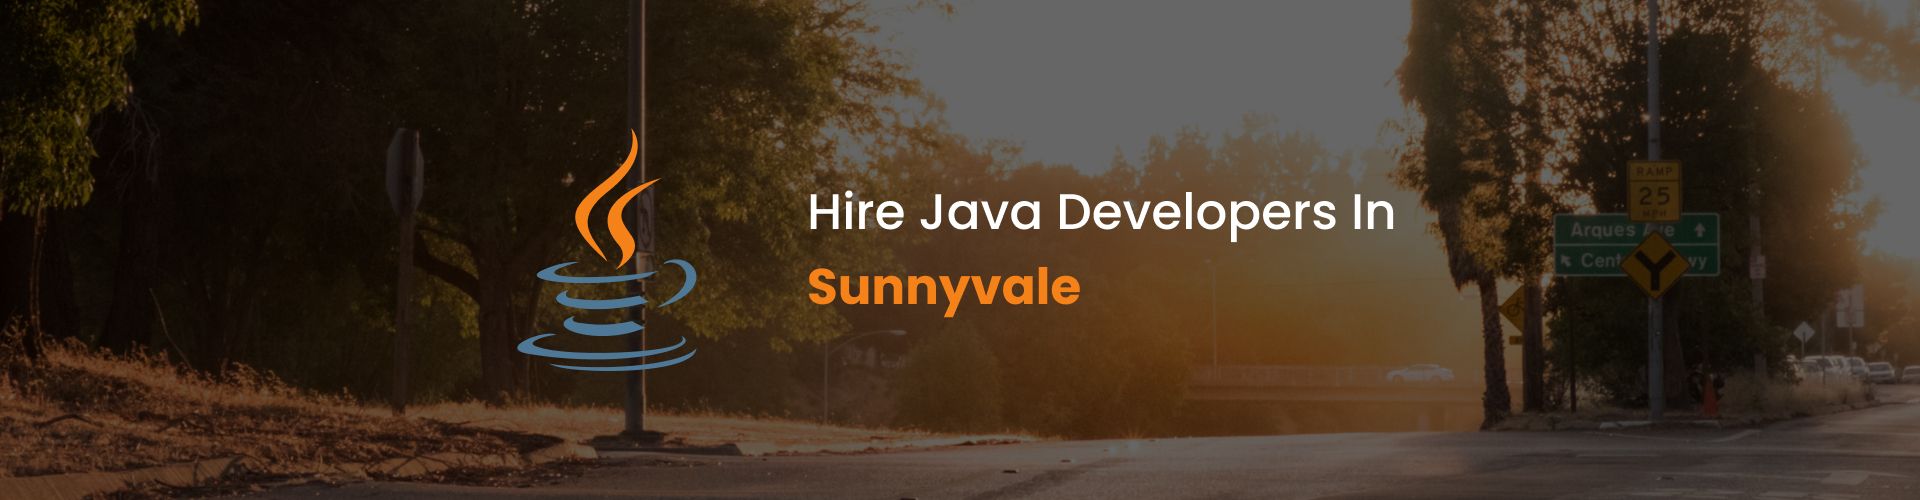 hire java developers in sunnyvale